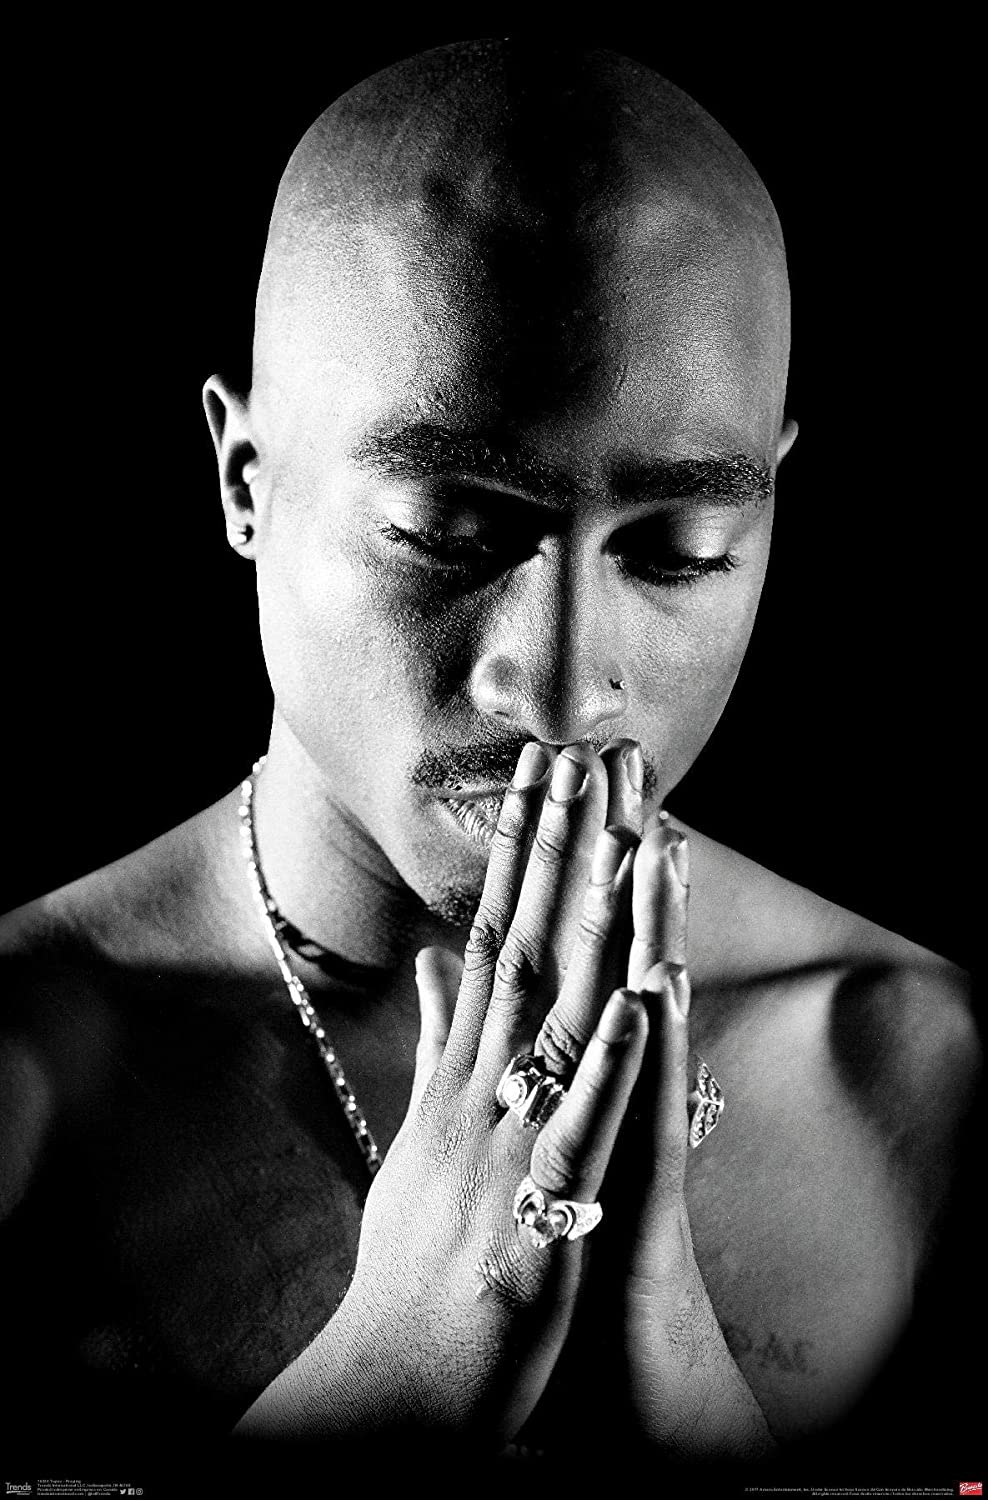 Reflection: Tupac’s wisdom challenges the culture